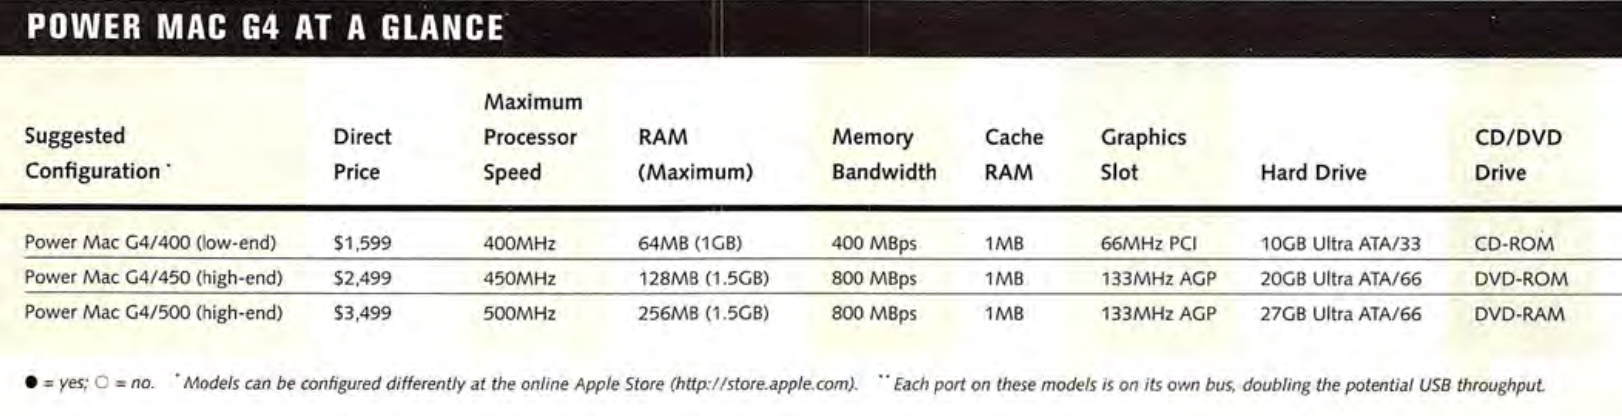 G4 specs, as of fall 1999